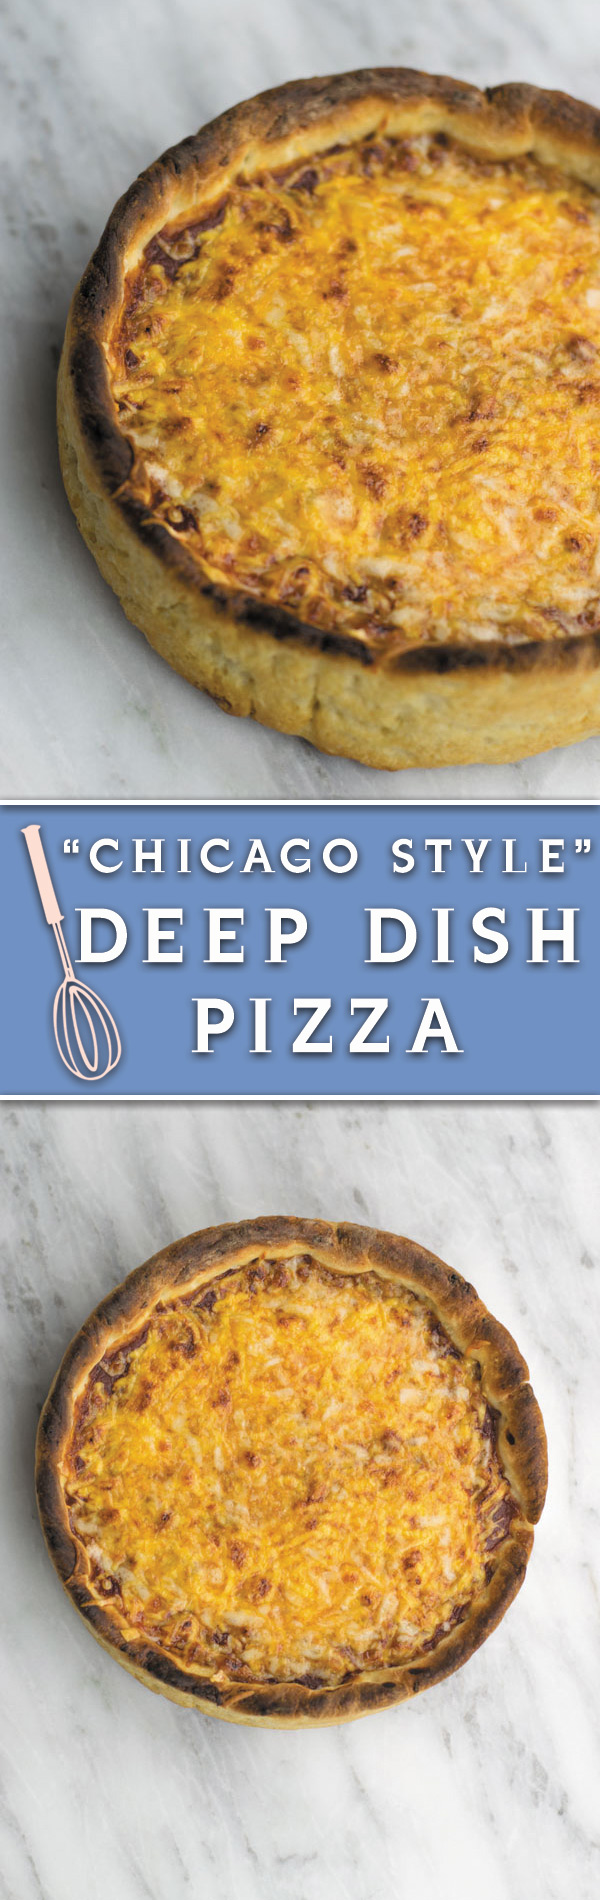 Deep Dish Pizza - Cheesy CHICAGO STYLE pizza, with a SECRET INGREDIENT in the crust that makes is soft & chewy!